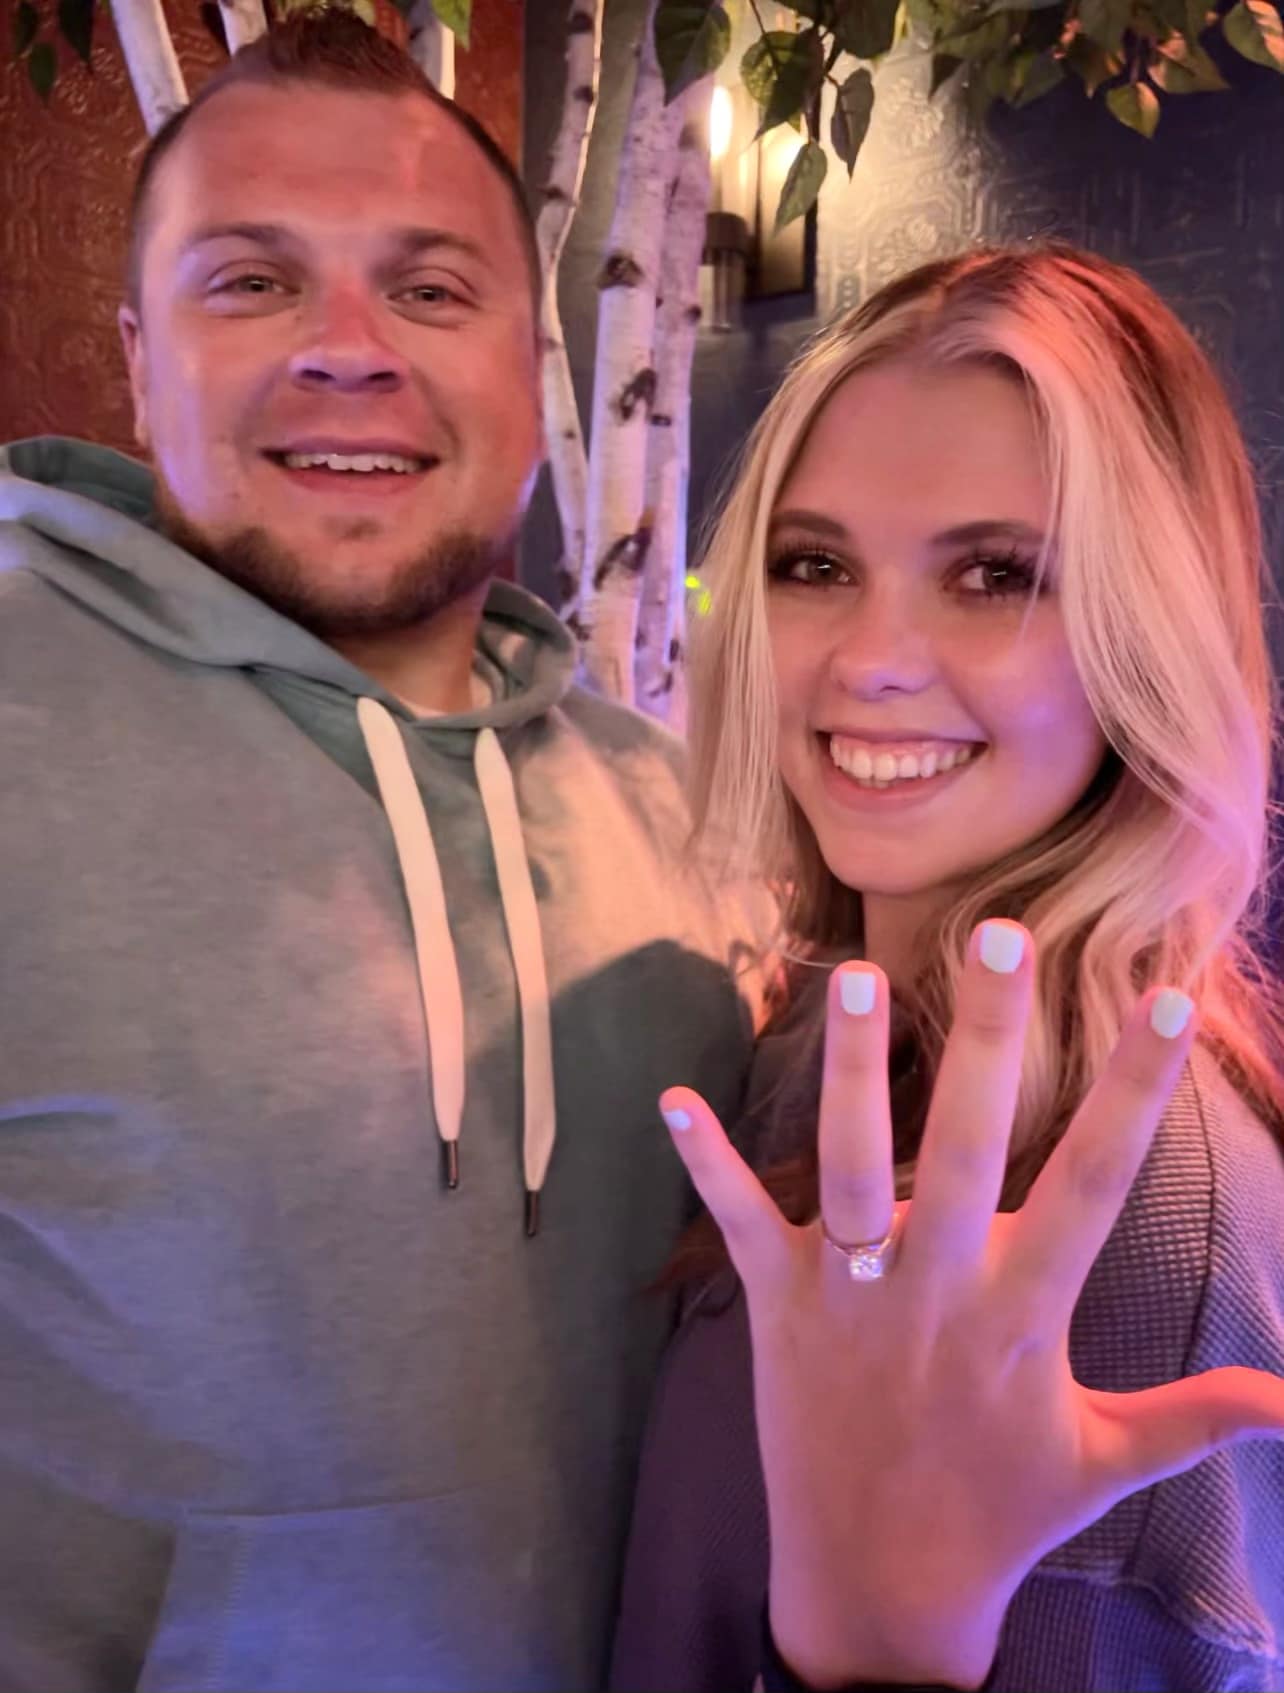 bride and groom to-be showing off new engagement ring at their romantic home marriage proposal